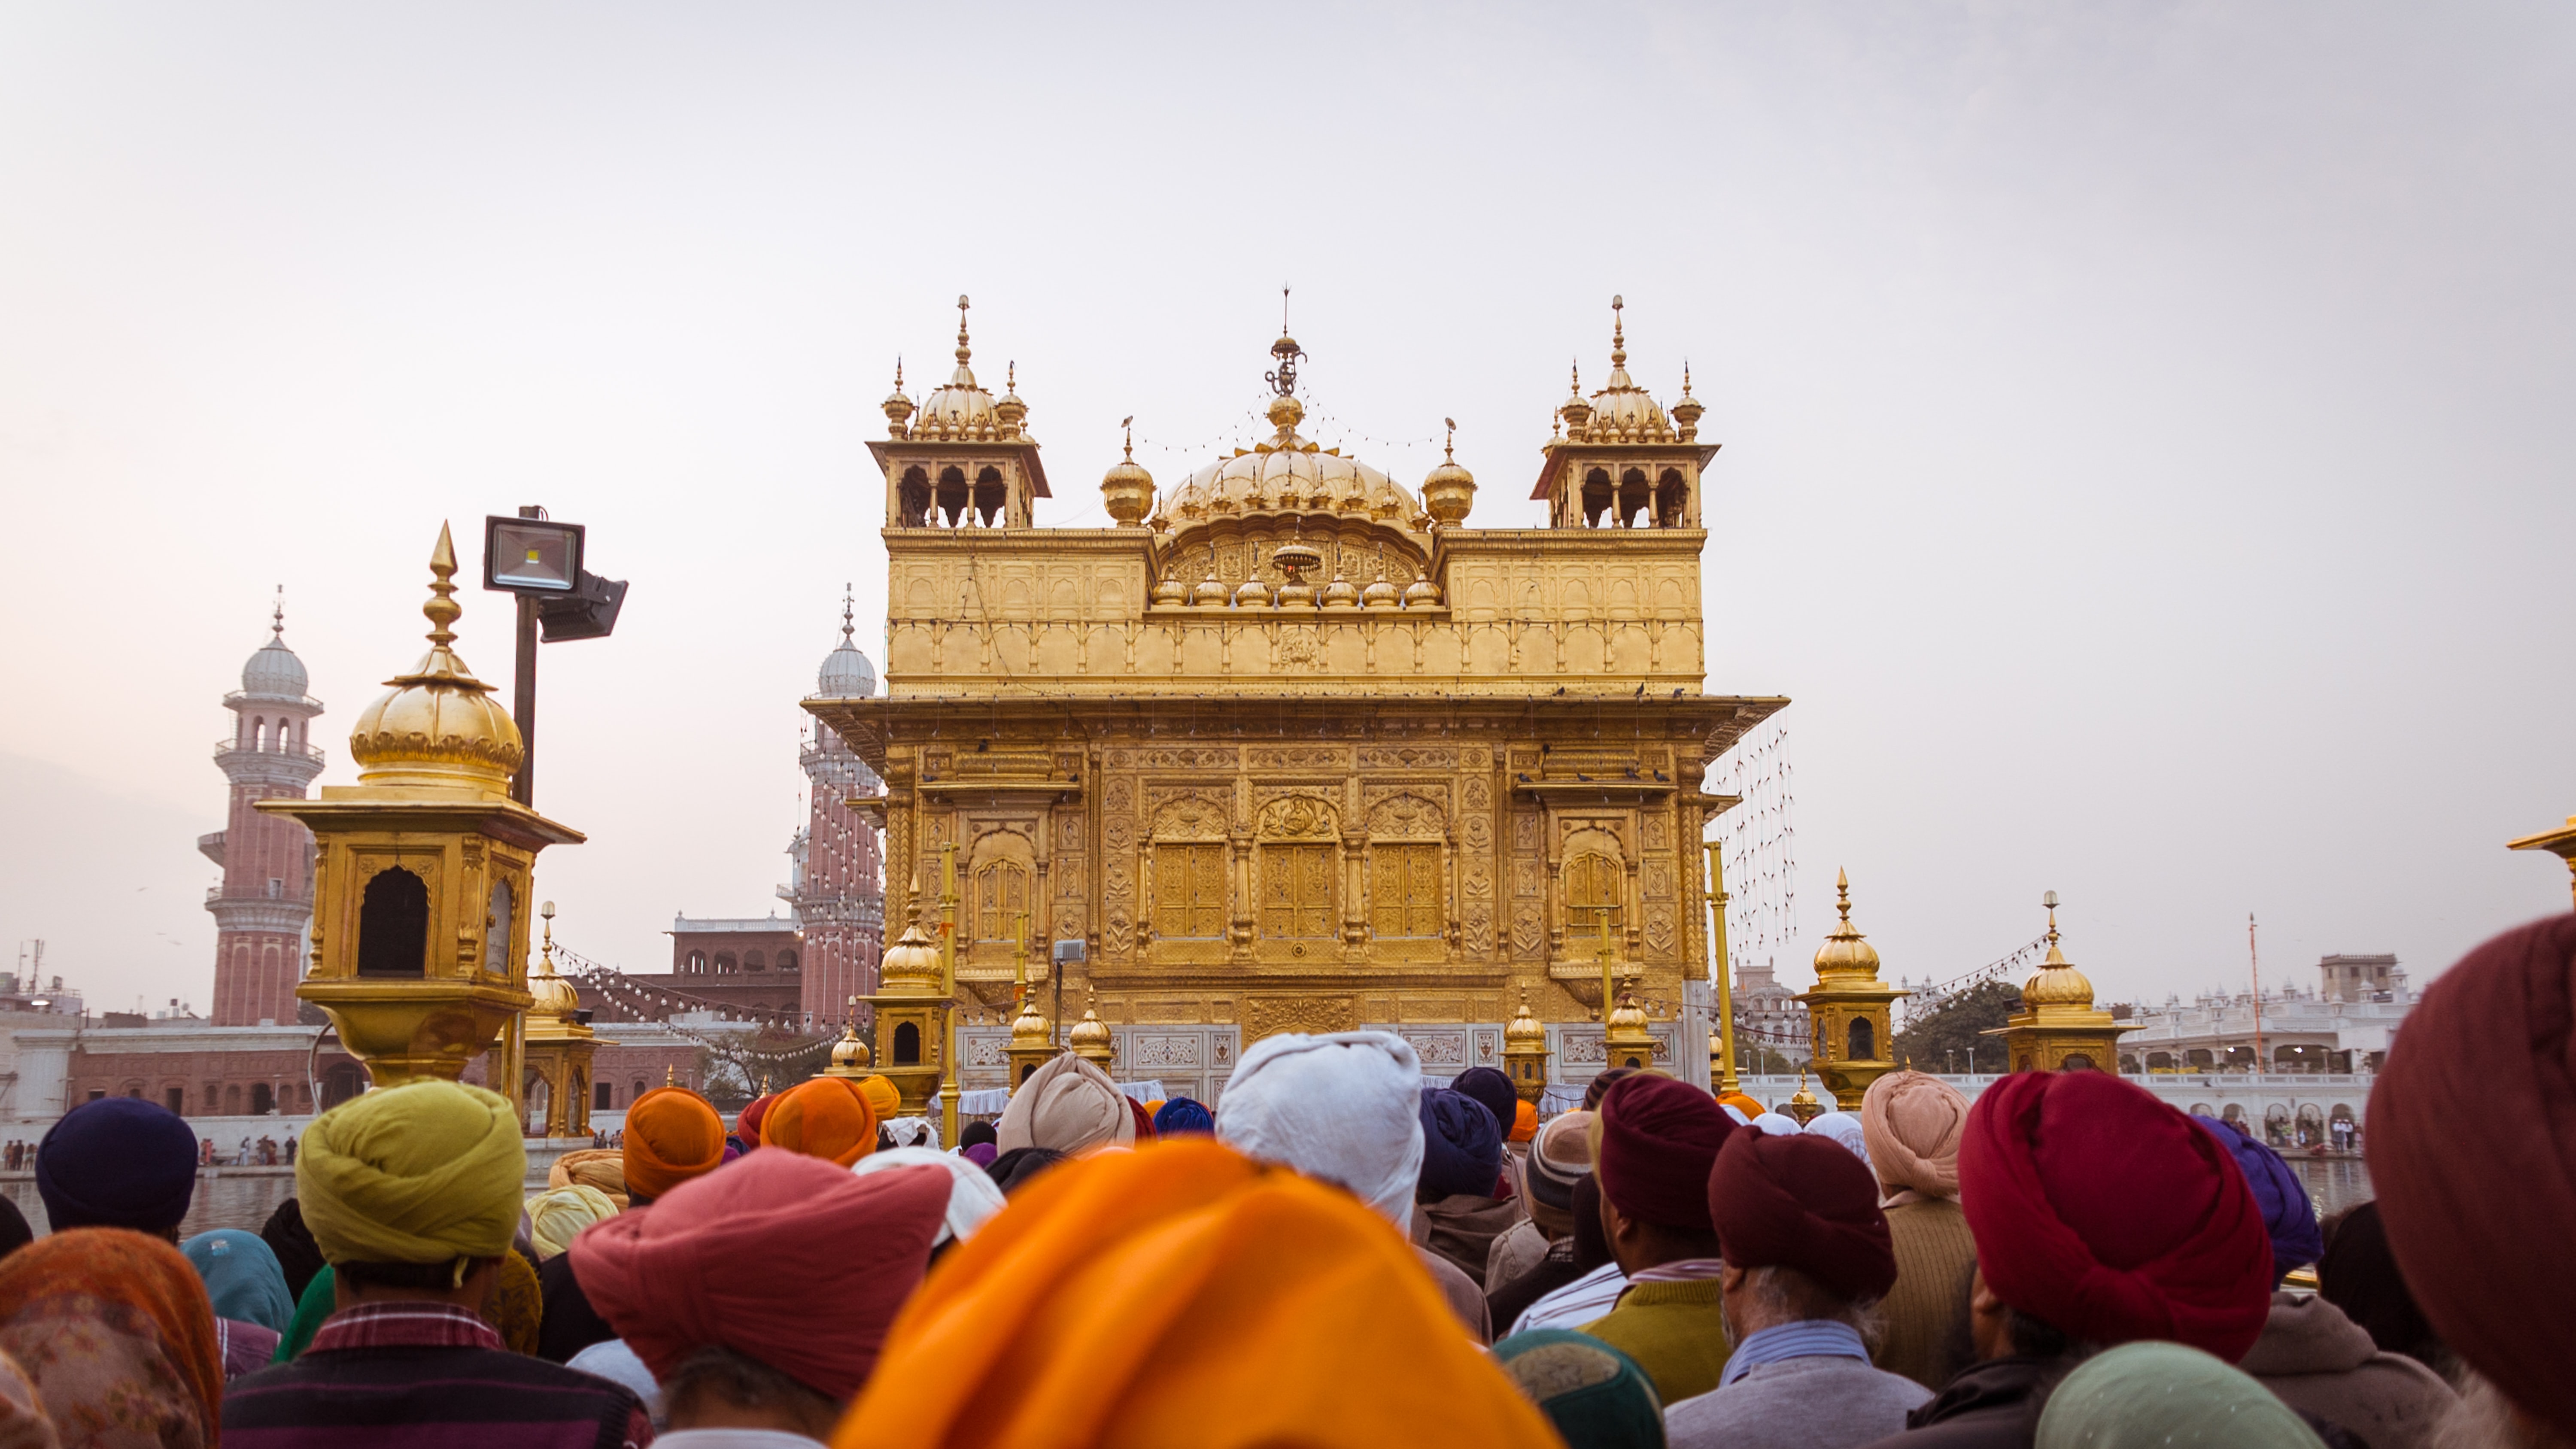 The Golden Temple in Amritsar Photo by Kit Suman